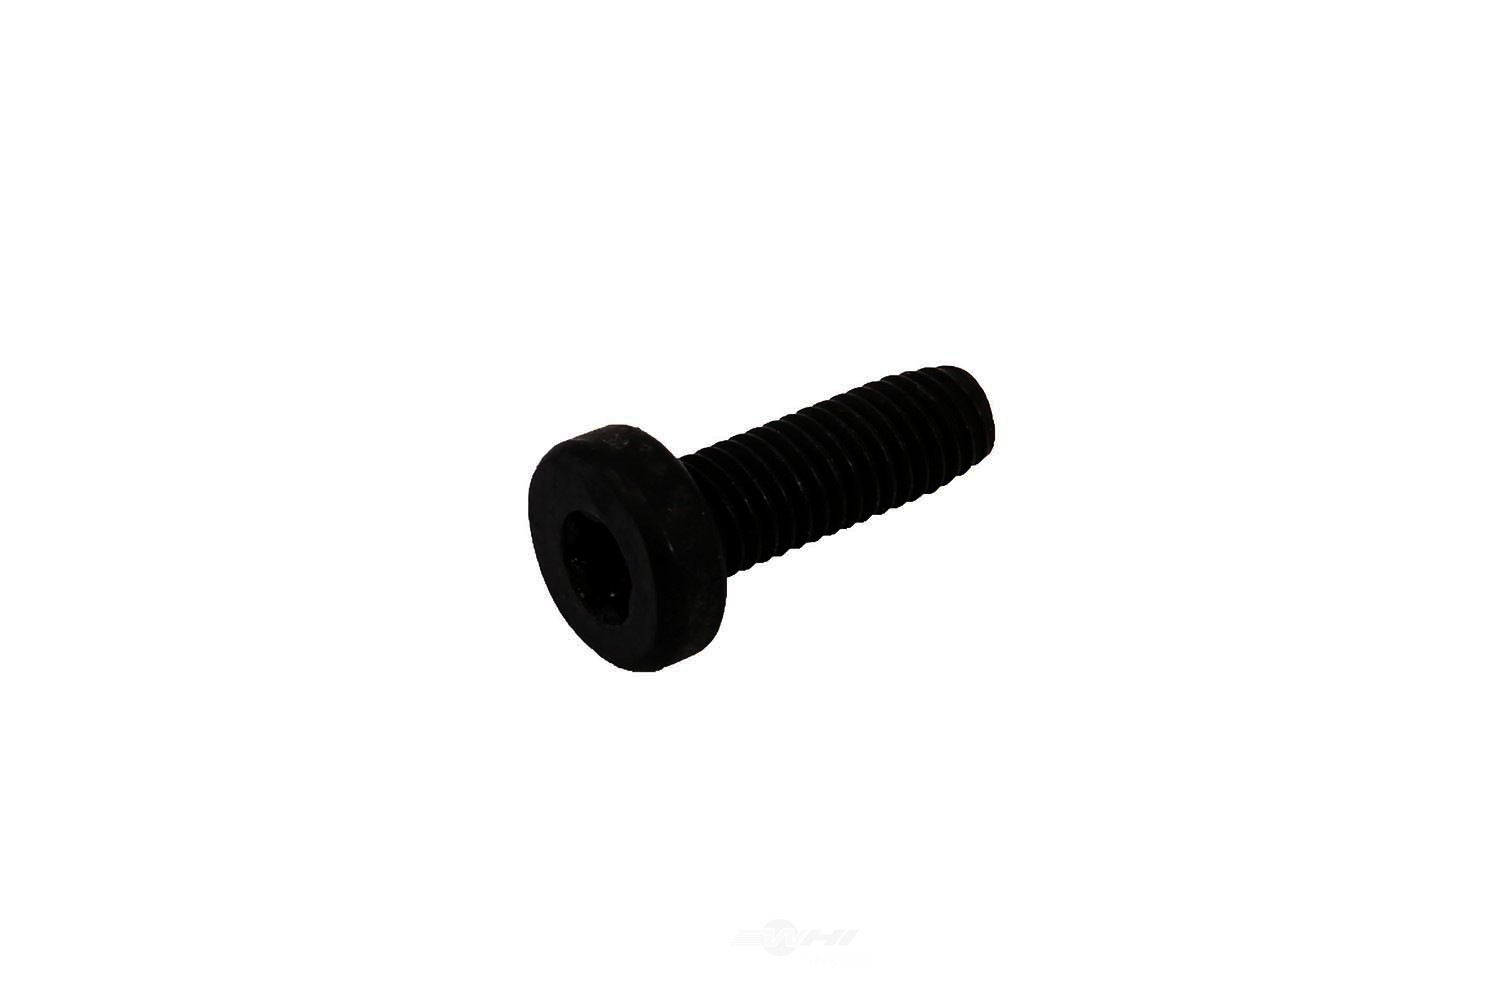 GM GENUINE PARTS - Ignition Switch Bolt - GMP 26036497